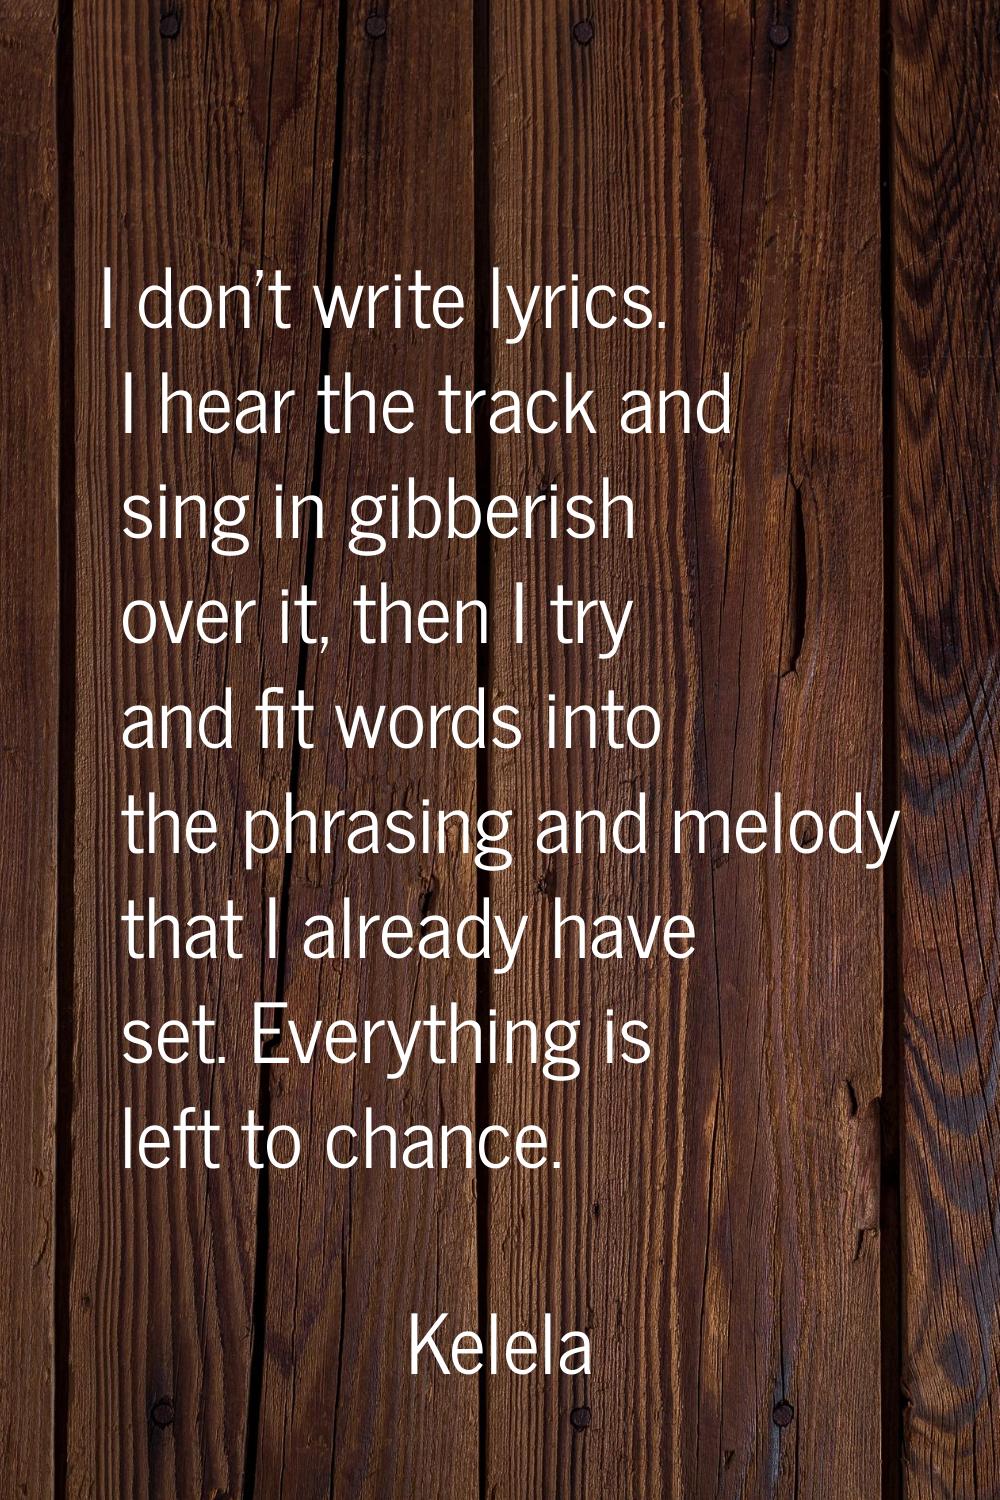 I don't write lyrics. I hear the track and sing in gibberish over it, then I try and fit words into